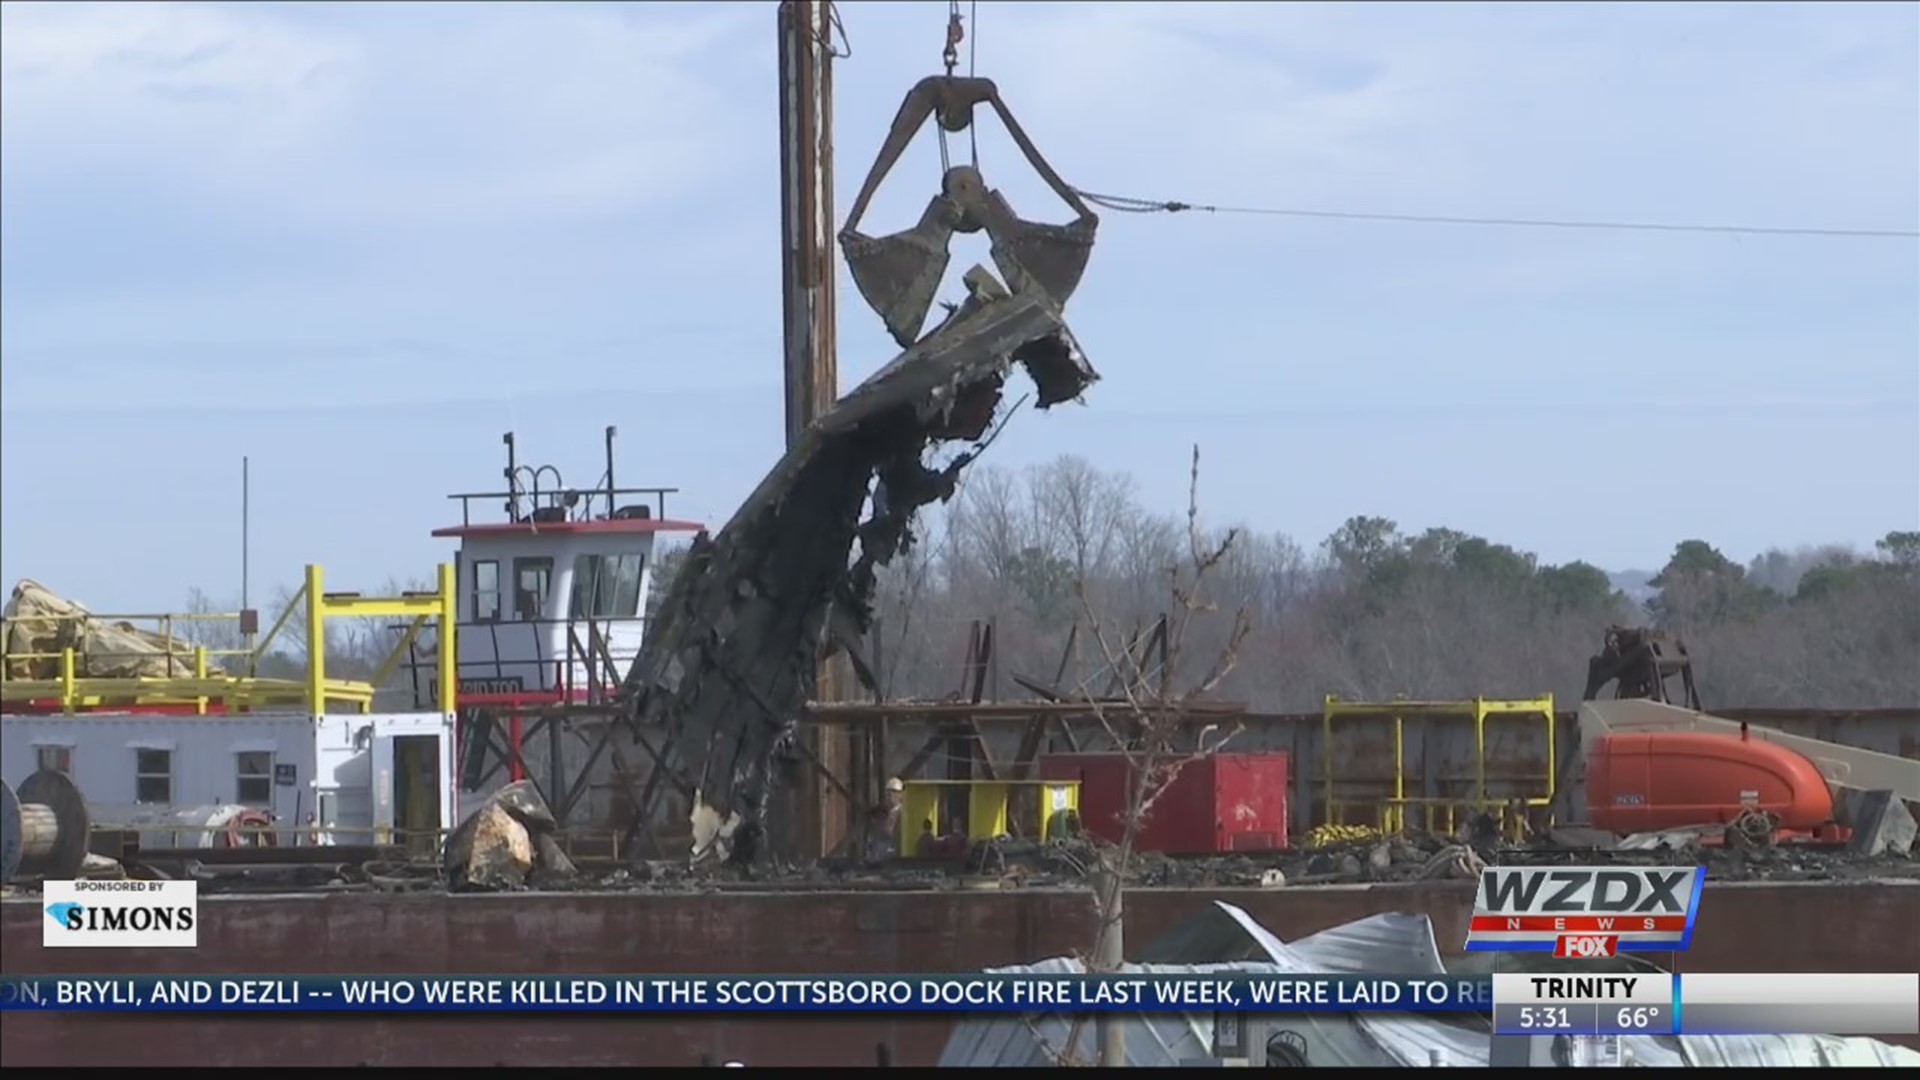 It’s been one week since a boat dock fire in Scottsboro killed eight people and destroyed at least 35 boats, and crews are still on site working to clean up the water. Although clean up efforts are still underway, part of Jackson County Park is back open to the public. People in the area can now go to the park to walk around and play on the playground.